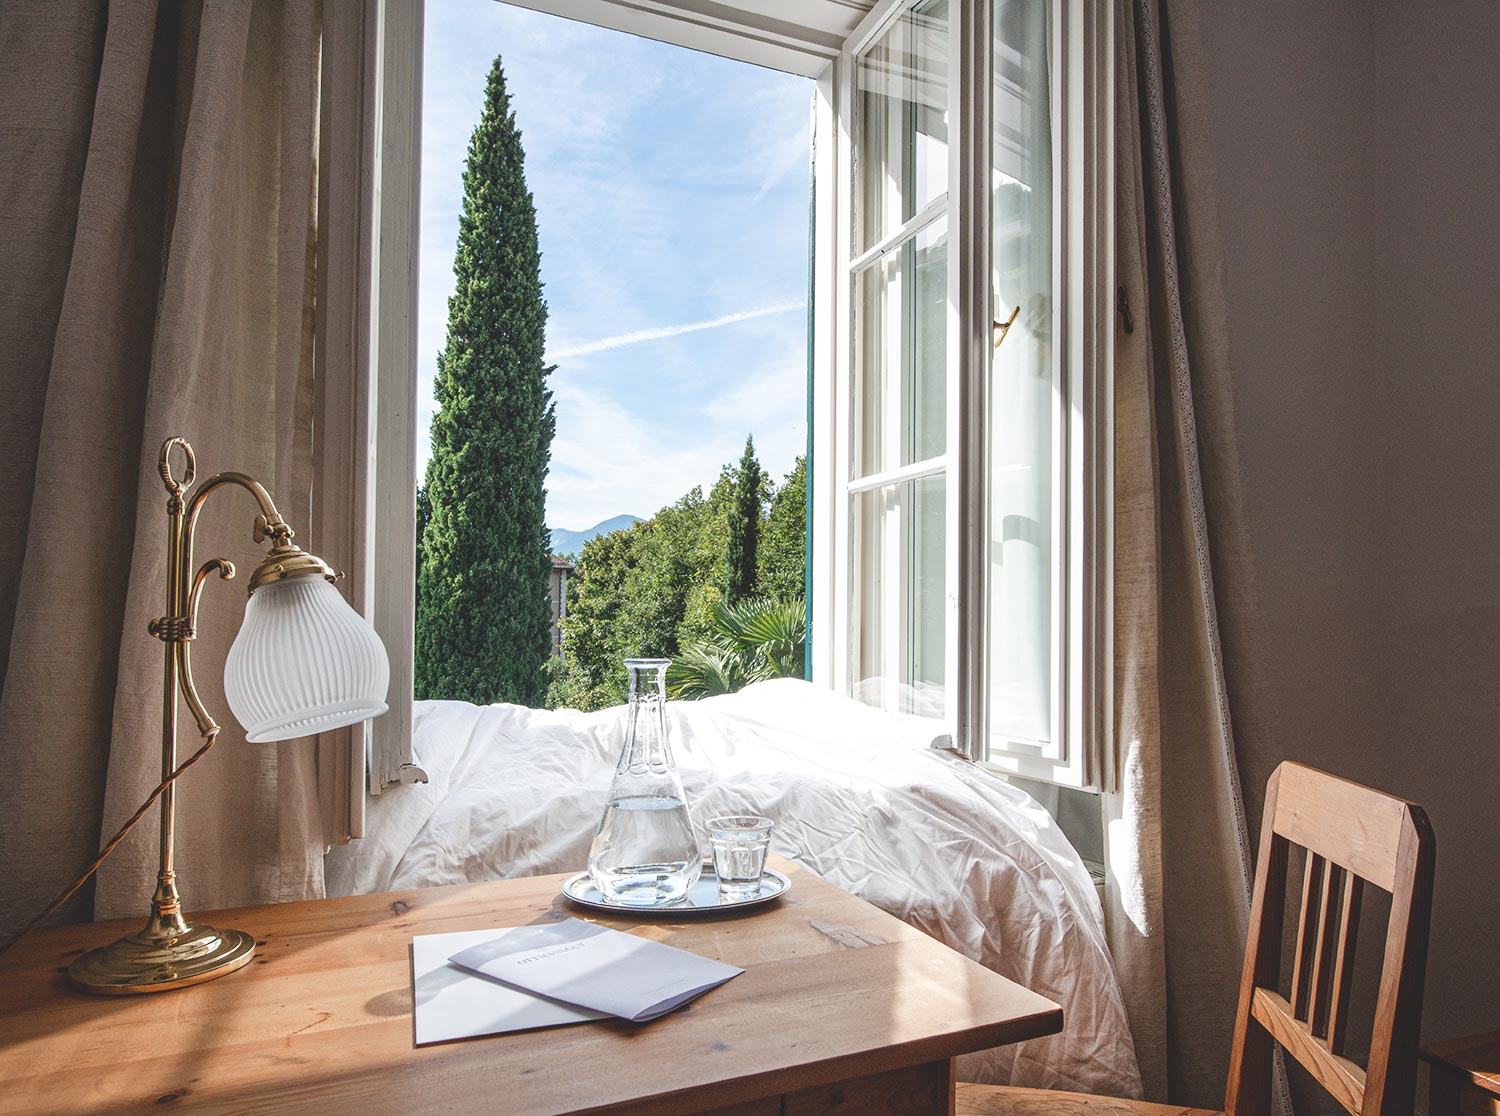 Pretty Hotels: The Perfect Guide to Merano / South Tyrol (Image 4)